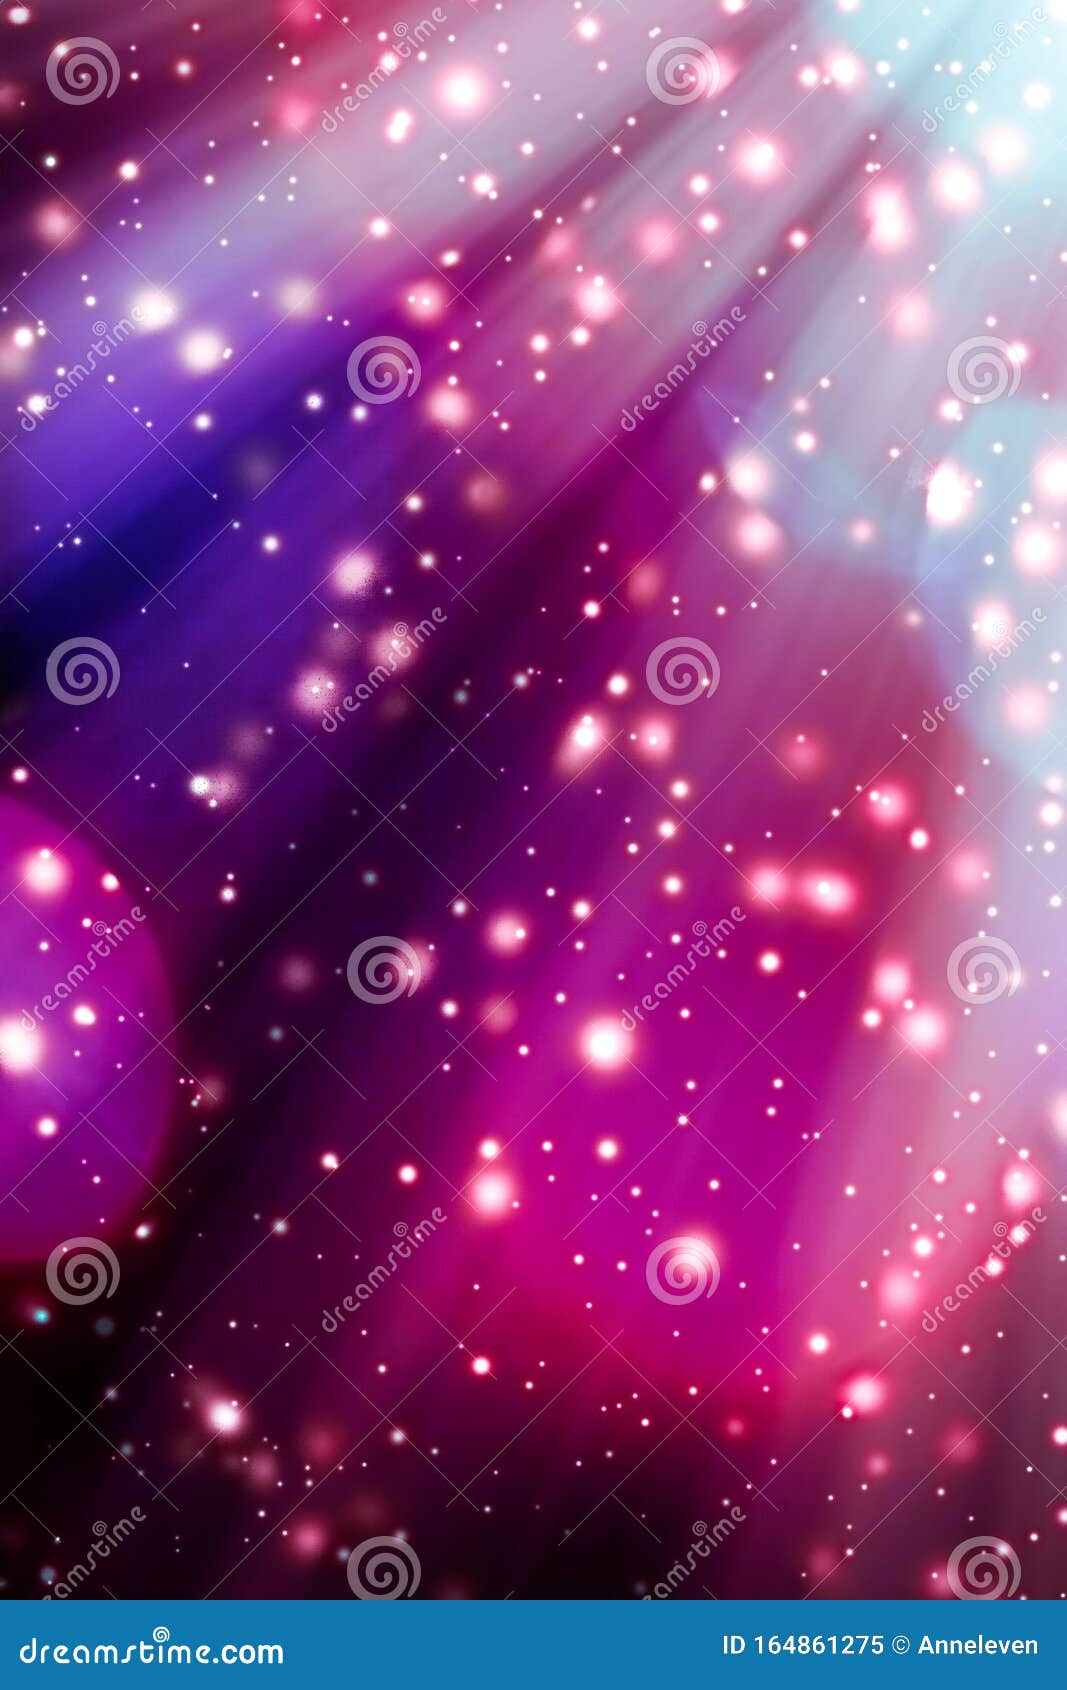 Abstract Cosmic Starry Sky Lights and Shiny Glitter, Luxury Holiday ...